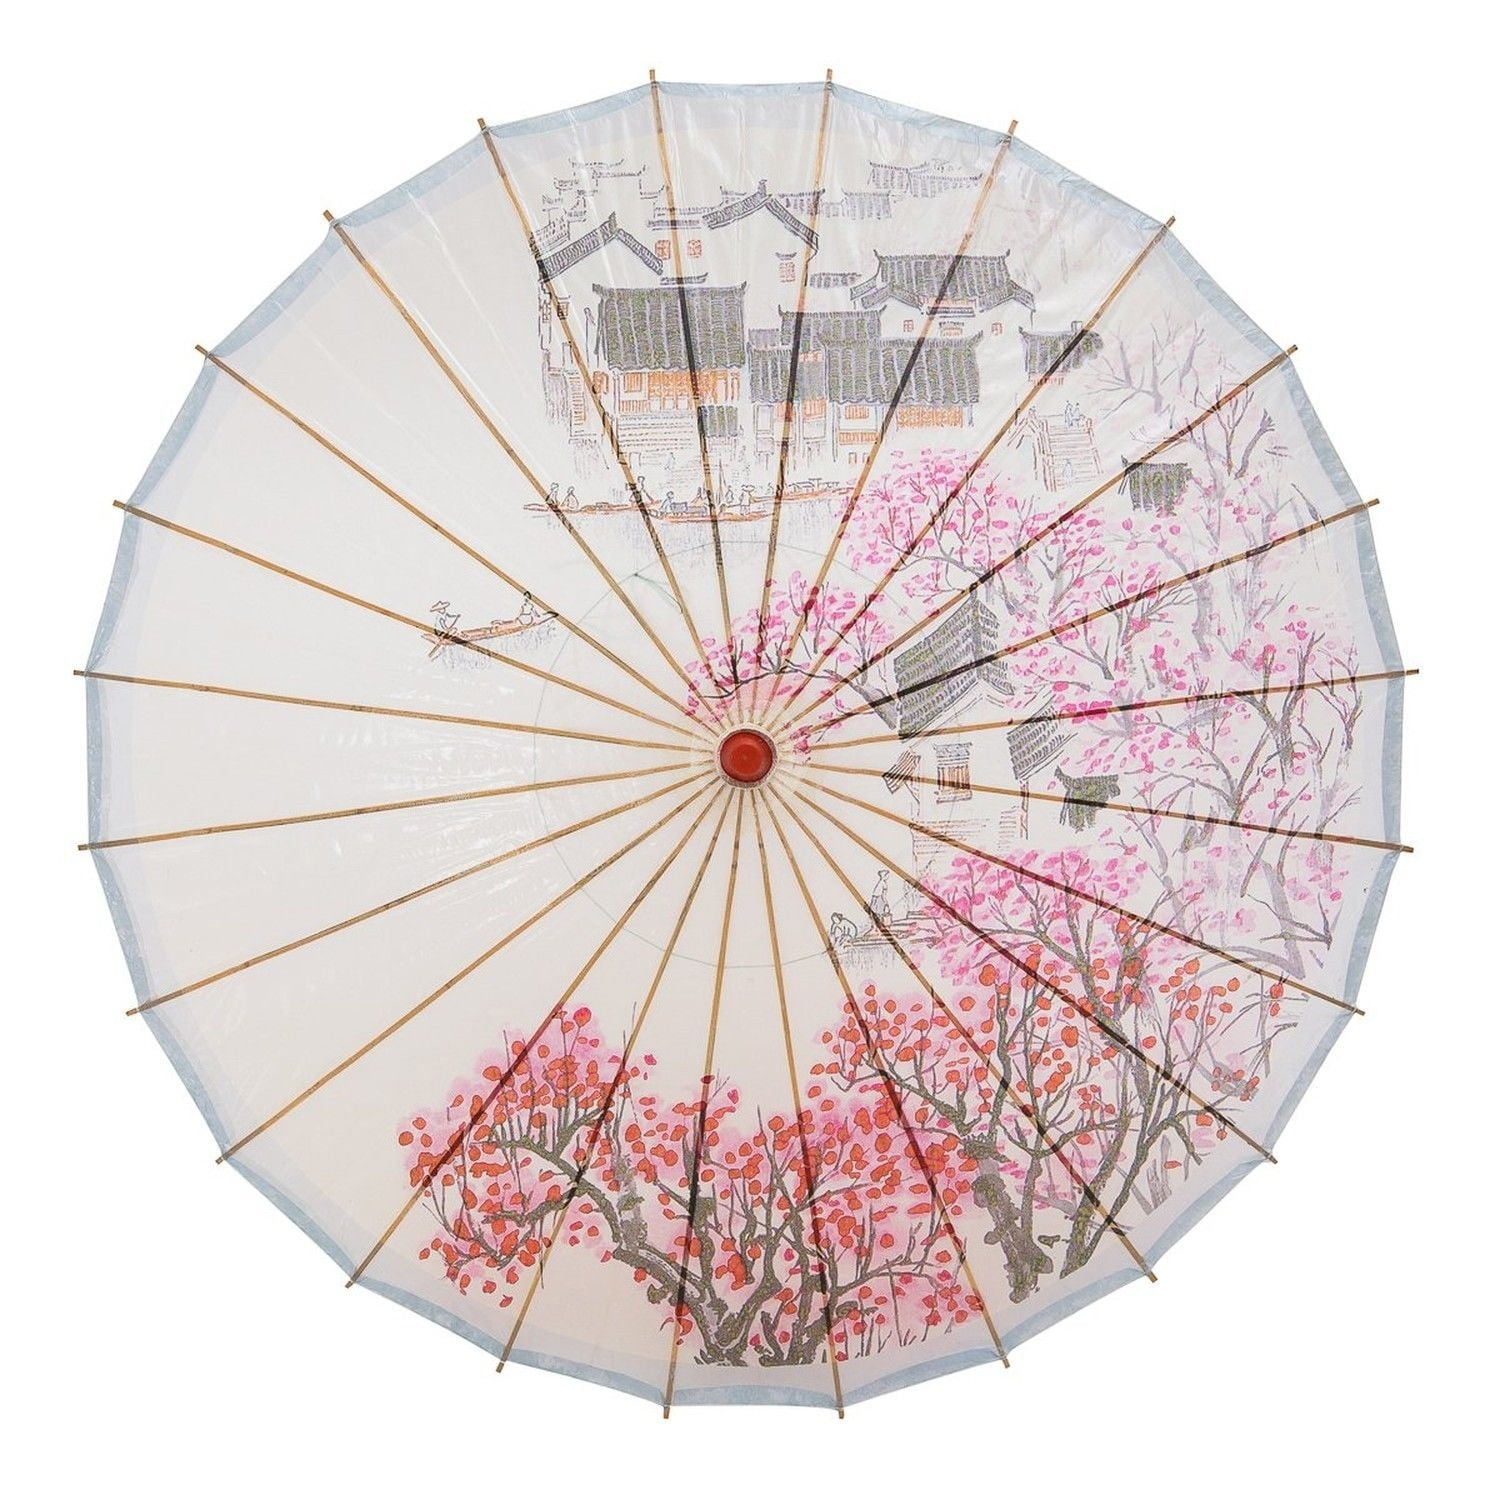 THY Collectibles Rainproof Handmade Chinese Oiled Paper Umbrella Parasol  33